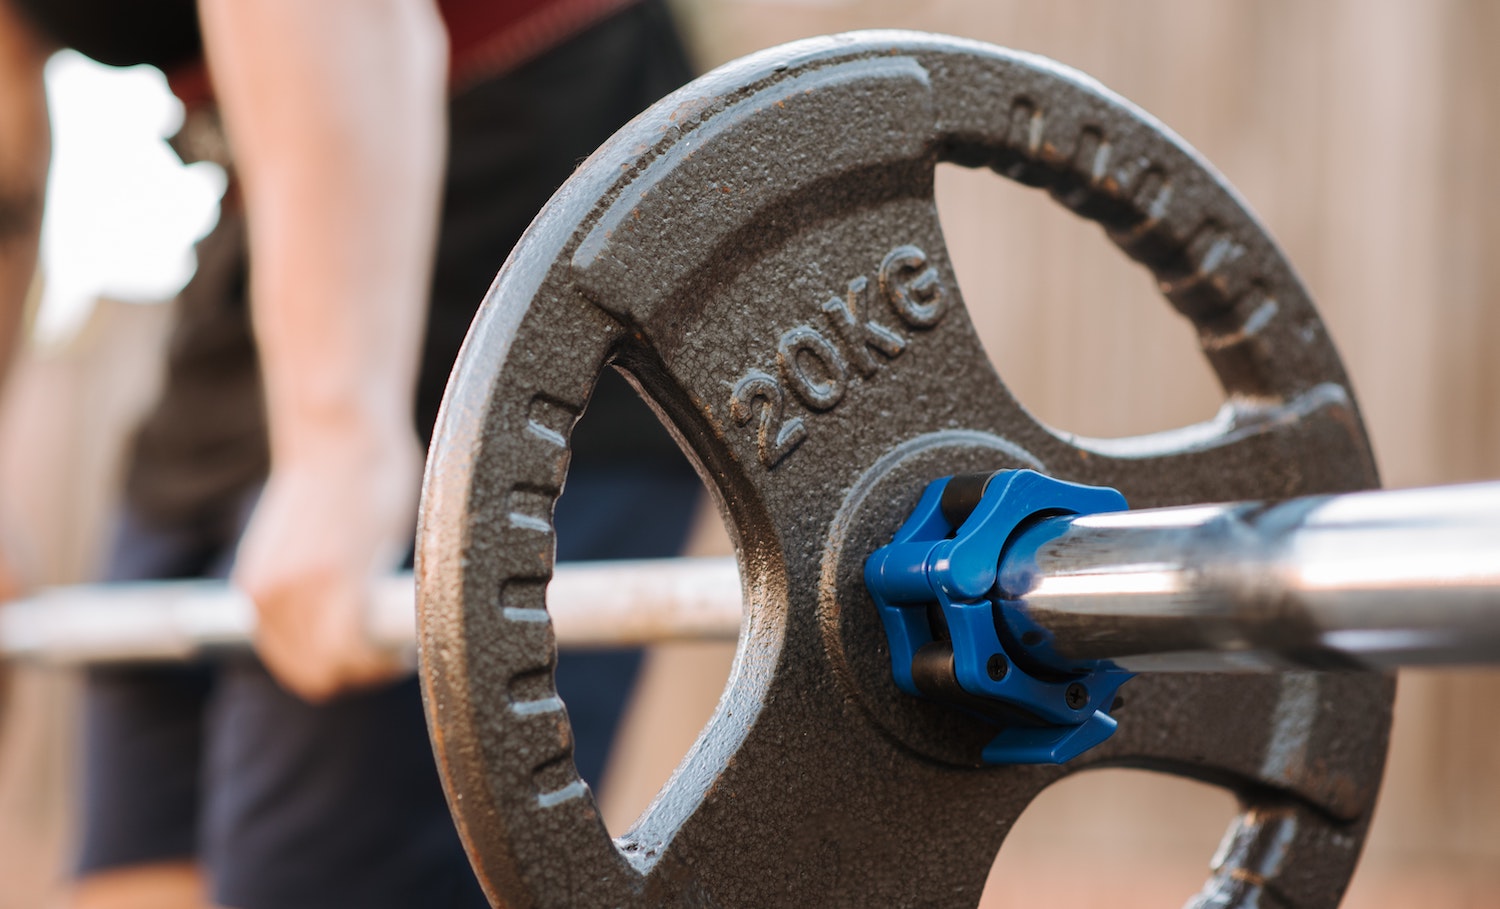 best barbell pads